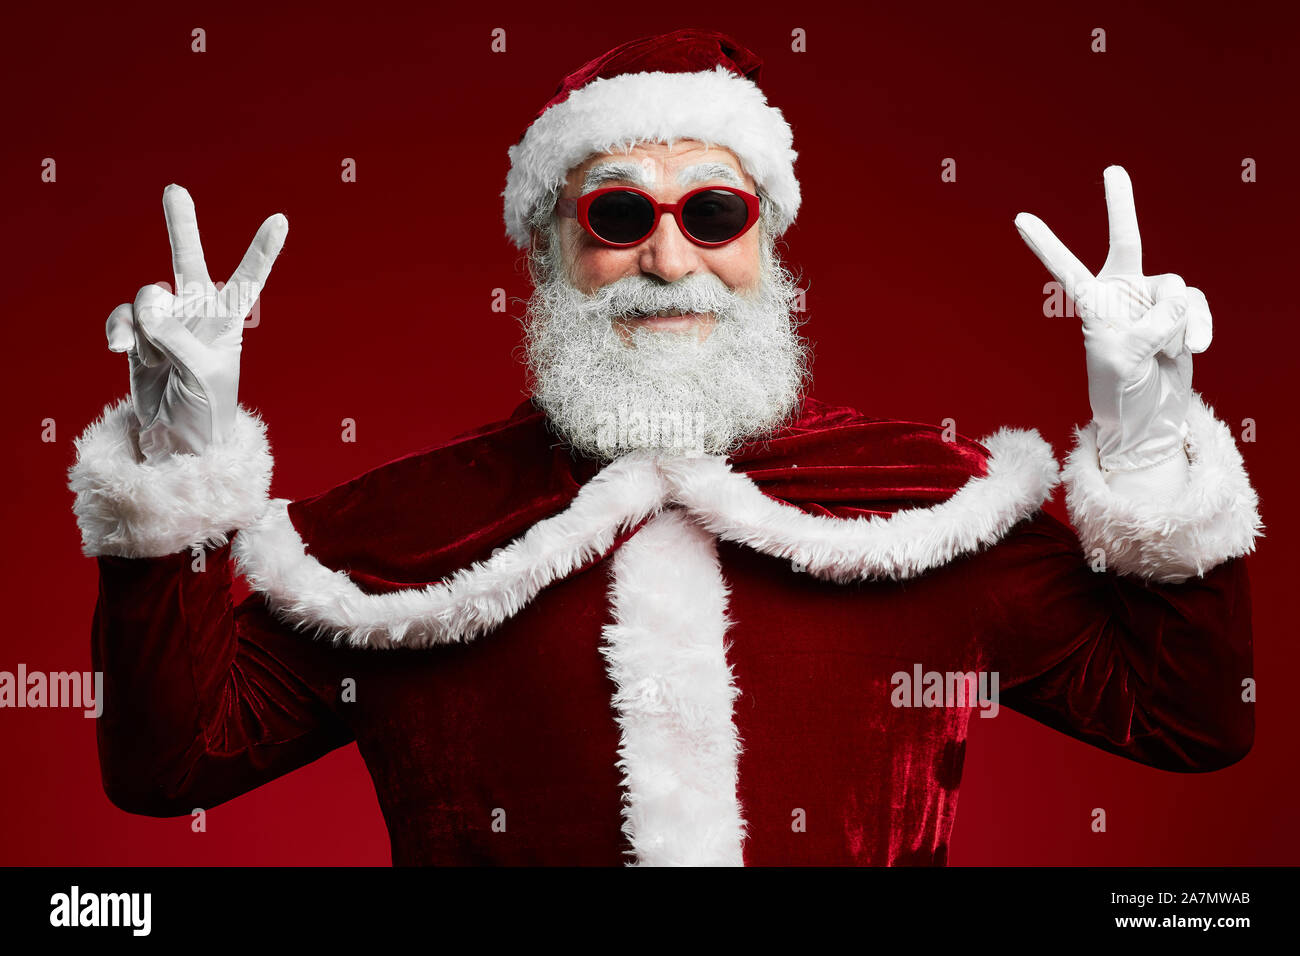 Waist up portrait of funky Santa wearing sunglasses and smiling at camera ready to enjoy Christmas party Stock Photo